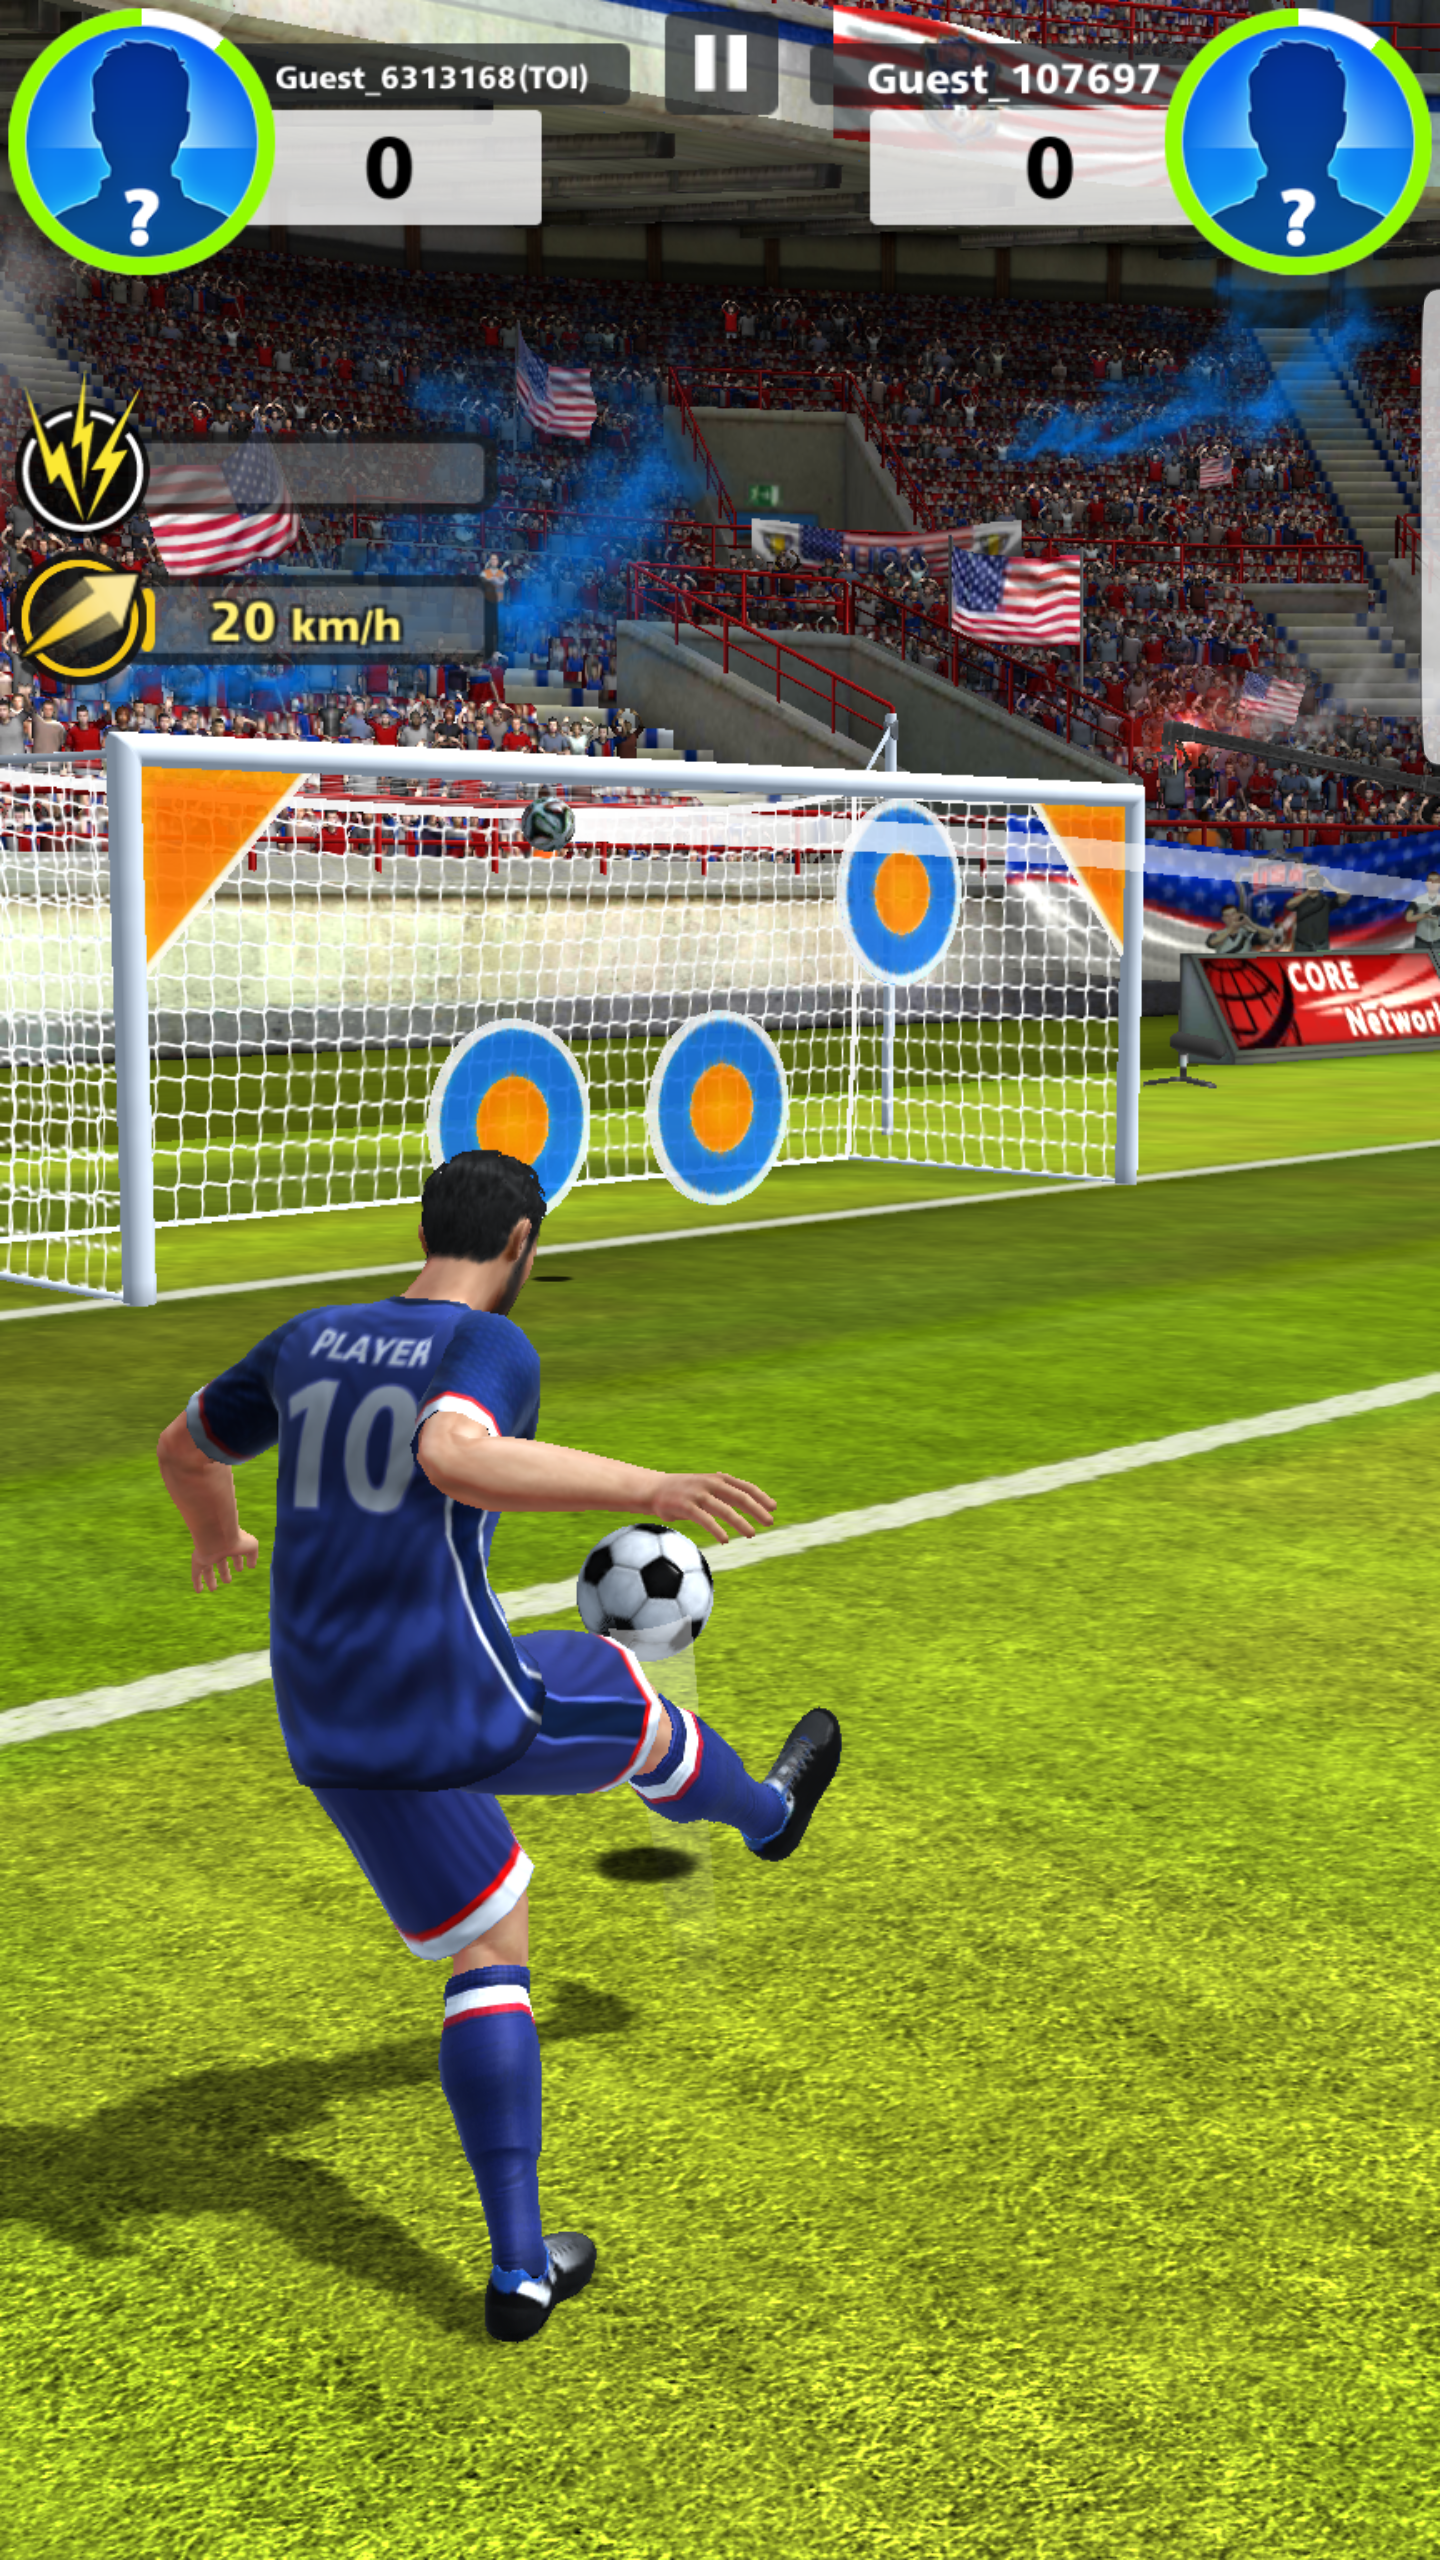 instal the last version for android Football Strike - Perfect Kick